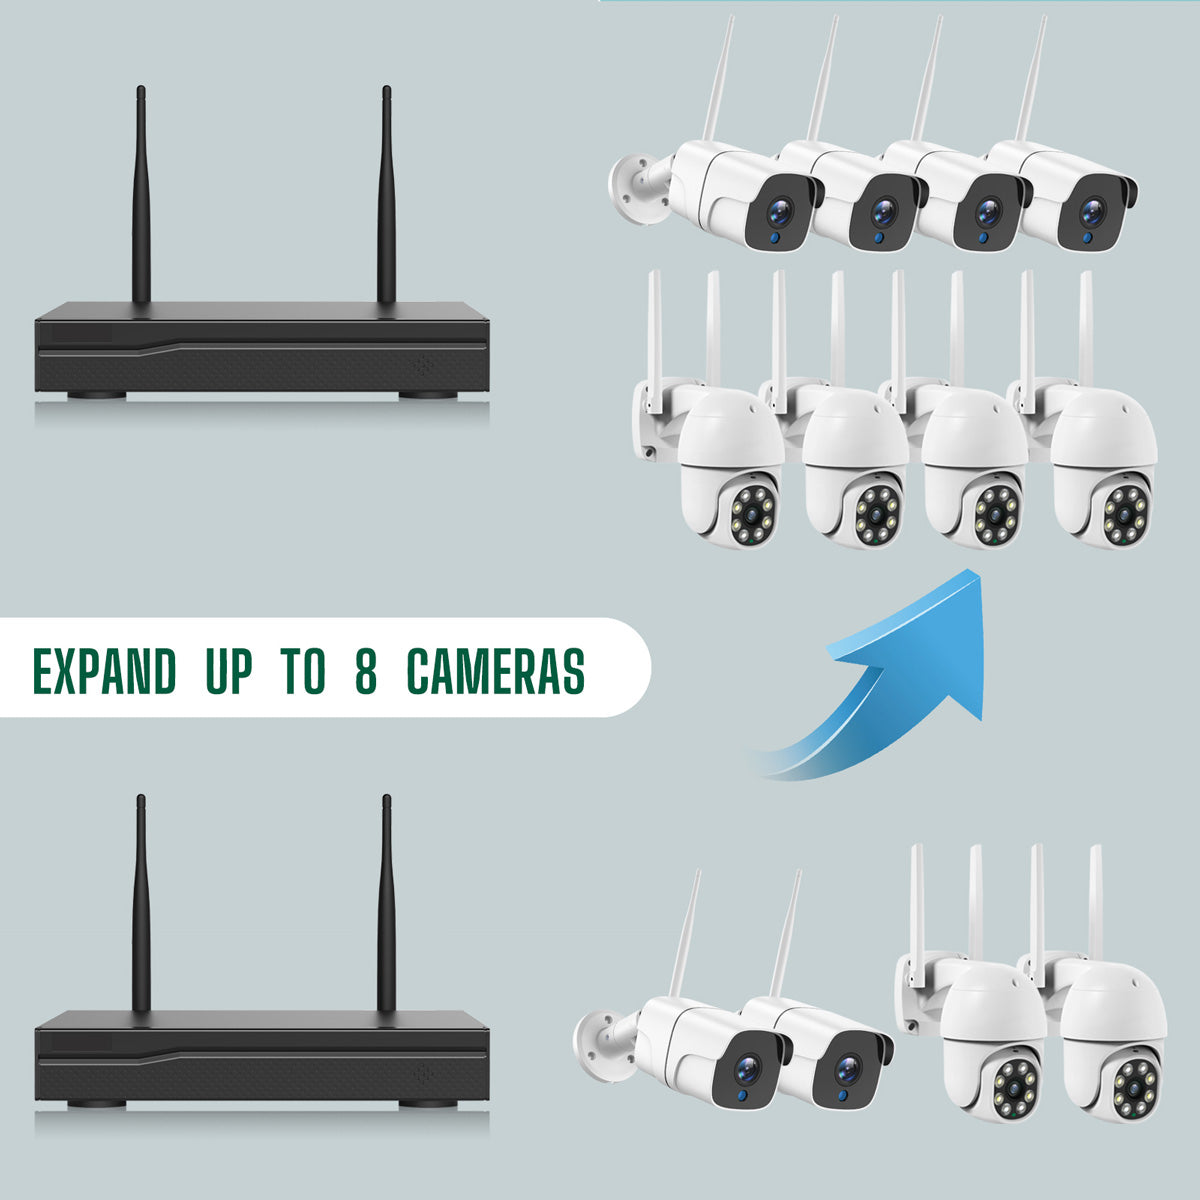 Campark W310 8CH 3MP PTZ Camera & Bullet Camera Combo Security Camera System Kit（Only available in Canada）